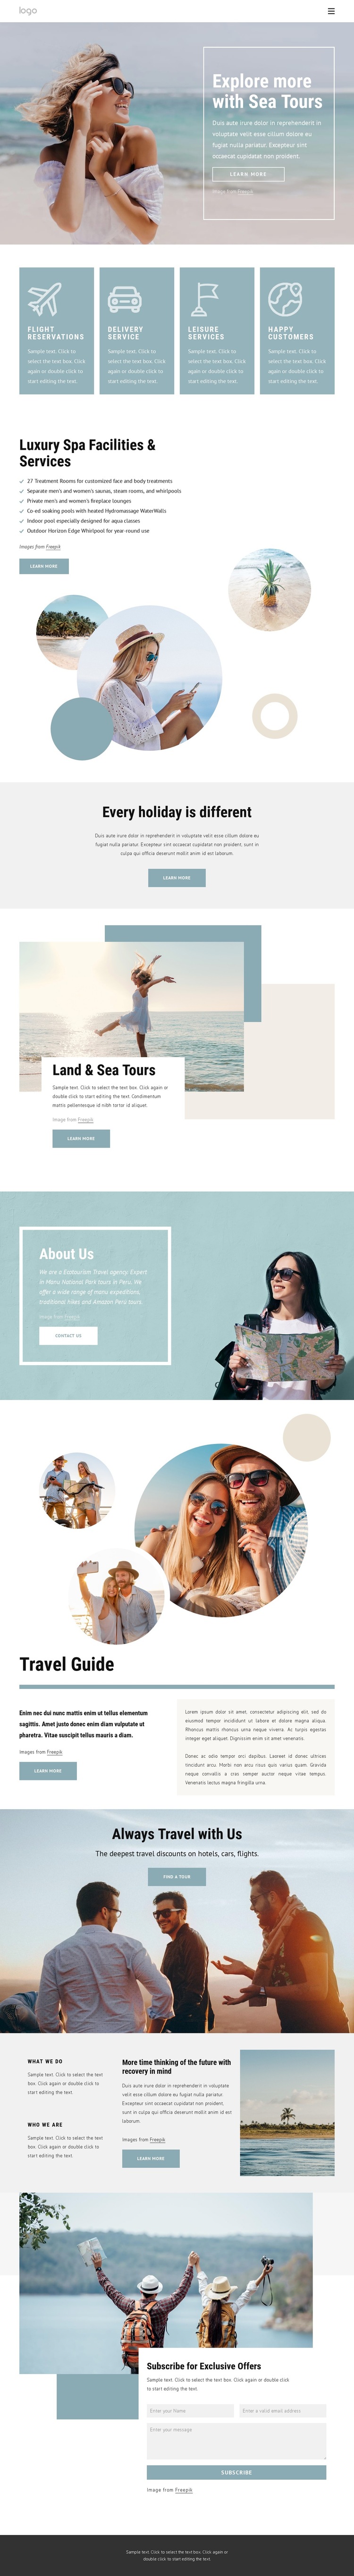 All-inclusive group adventure HTML5 Template